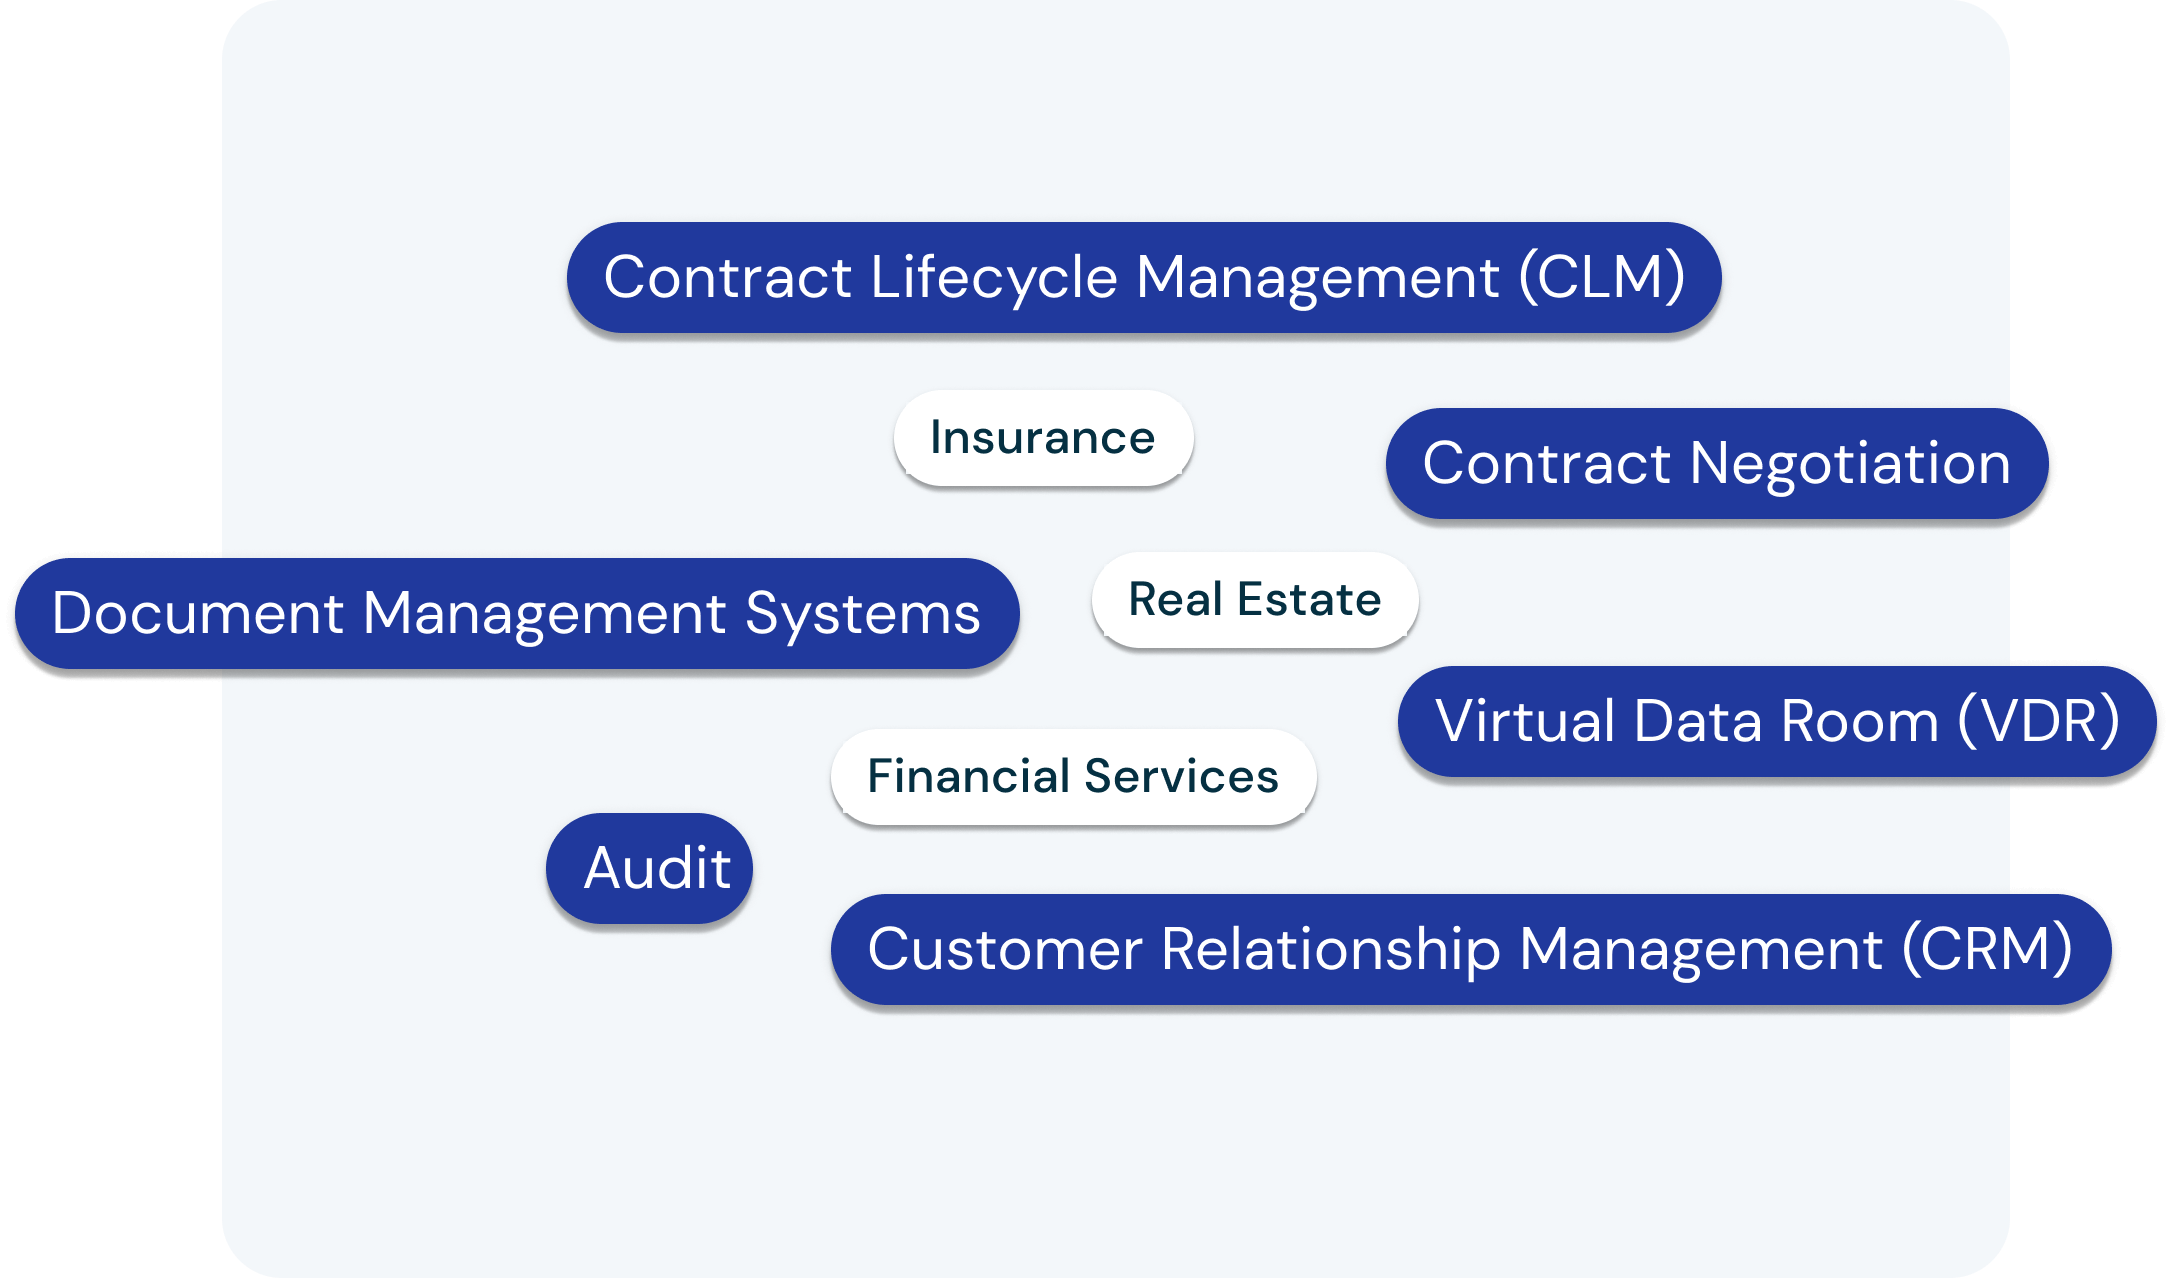 Example use cases: Contract lifecycle management (CLM), Audit, Document Management Systems, Client Relationship Management (CRM), Contract Negotiation, Virtual Data Room (VDR)